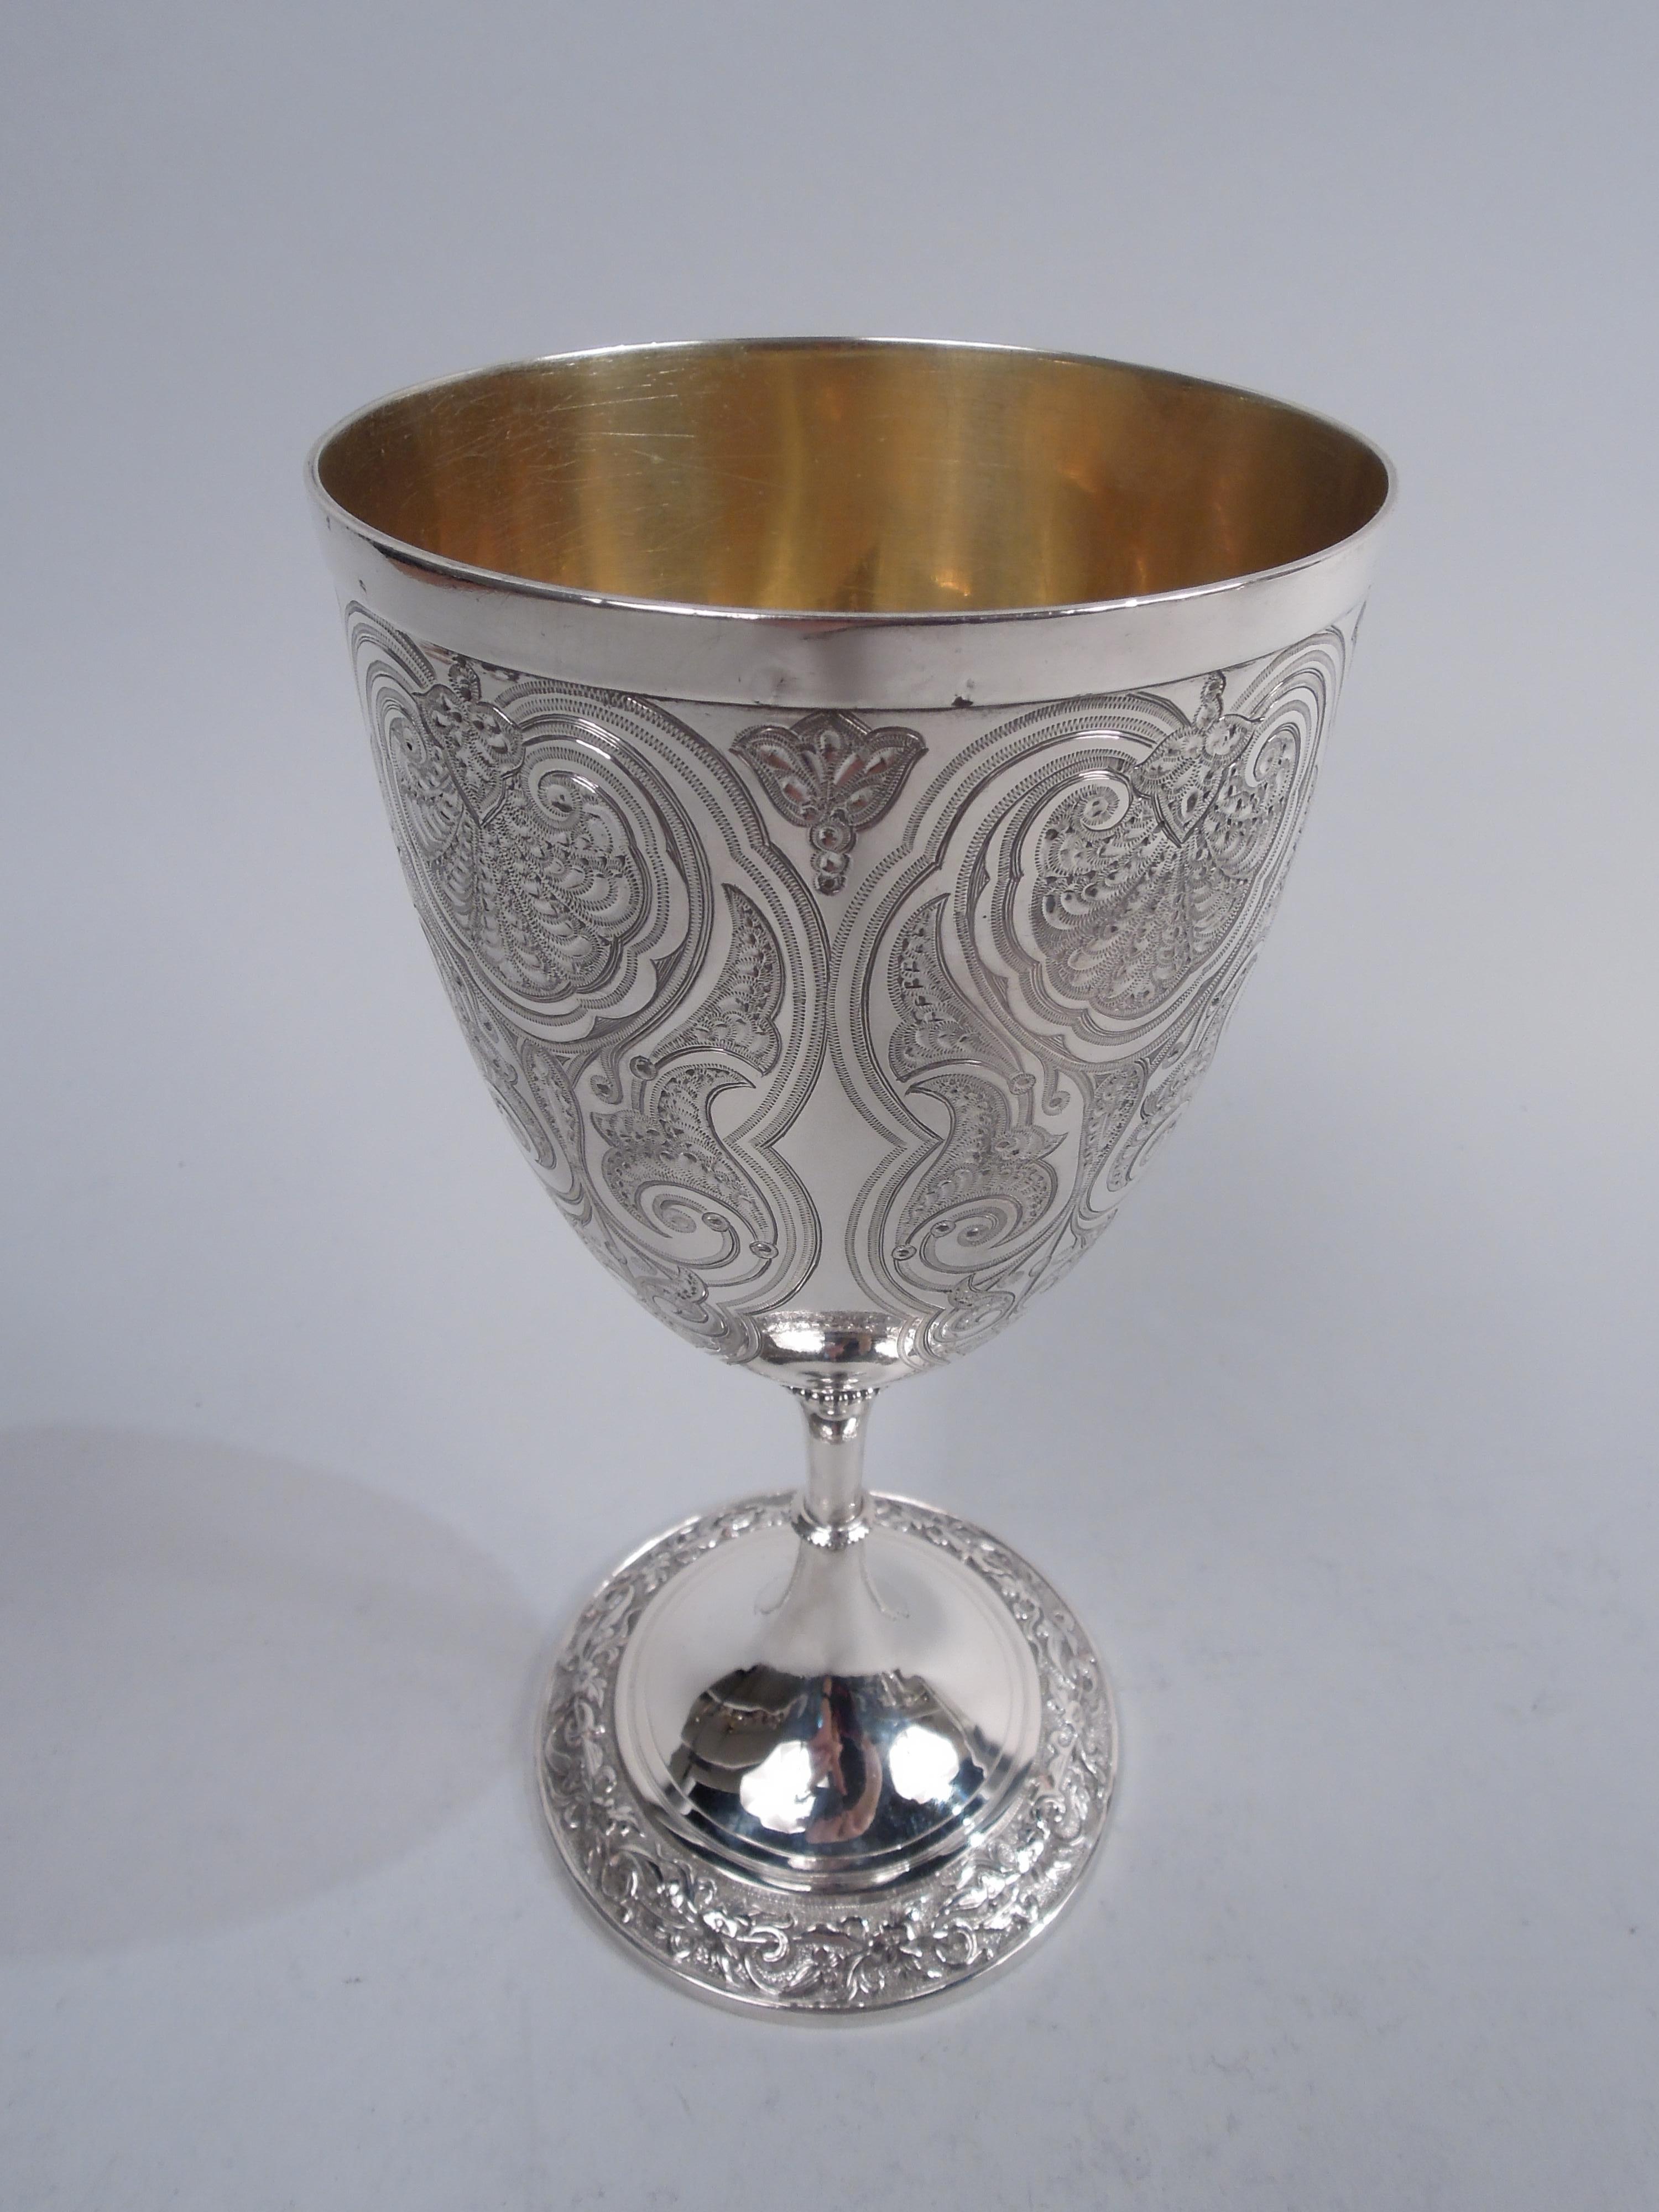 Victorian Classical sterling silver goblet. Made by Elkington & Co. Ltd in Birmingham in 1859. Ovoid bowl on knopped cylindrical stem flowing into raised foot. Bowl has engraved vertical scrolled frames inset with leafing scrolls surmounted by